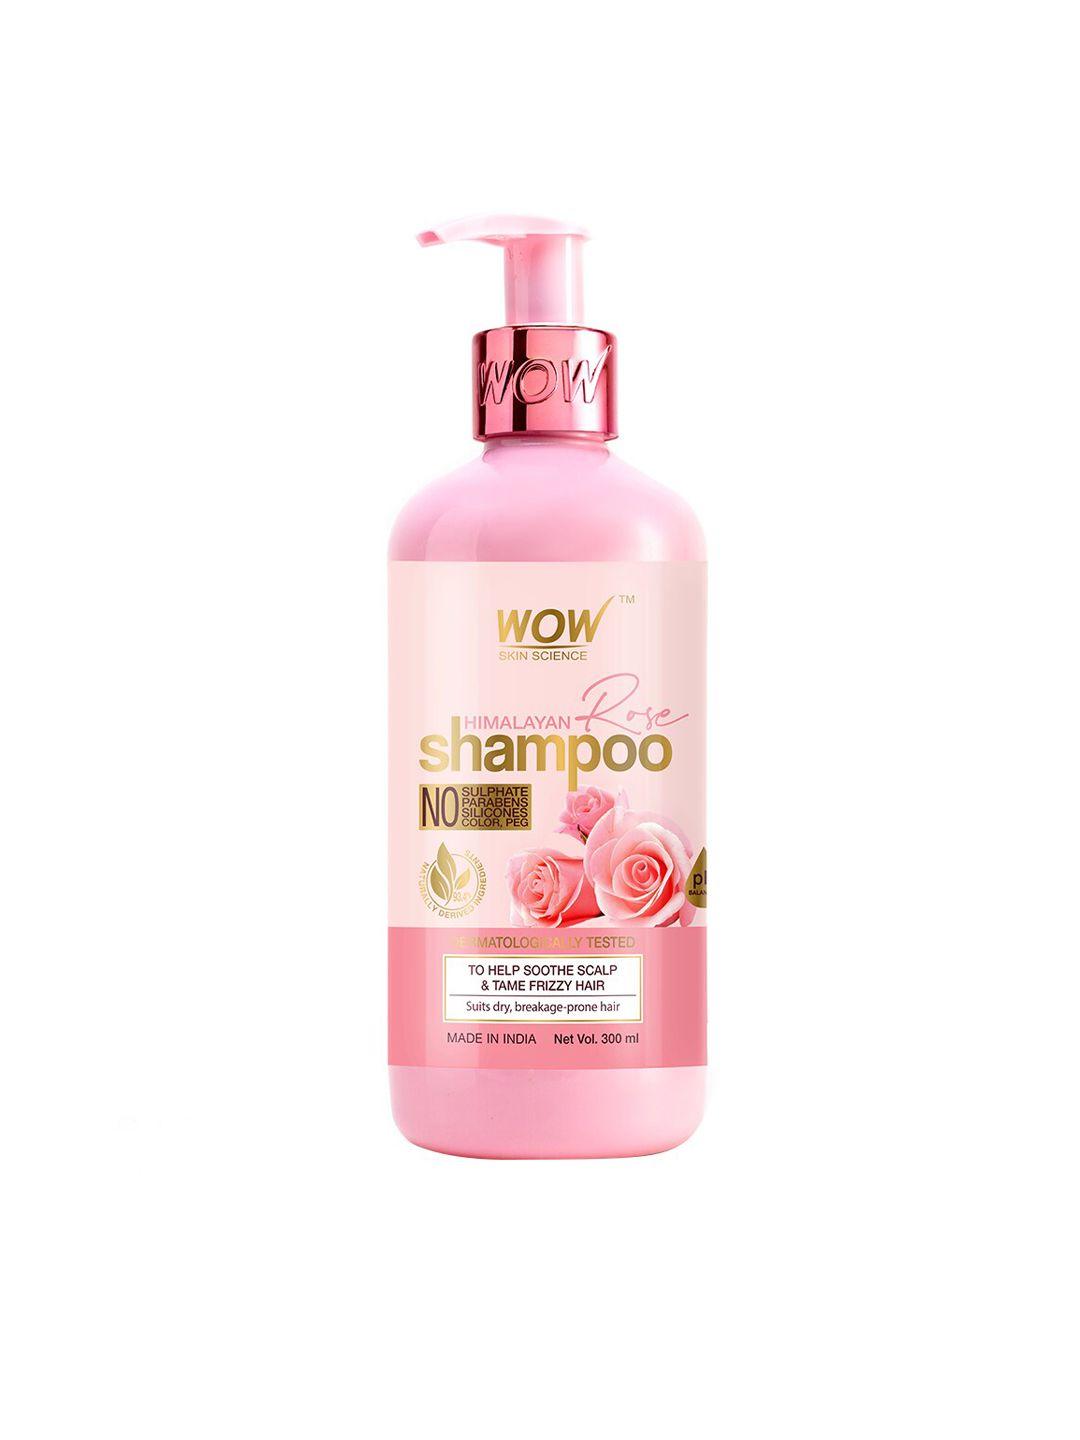 wow skin science himalayan rose shampoo with coconut oil 300 ml